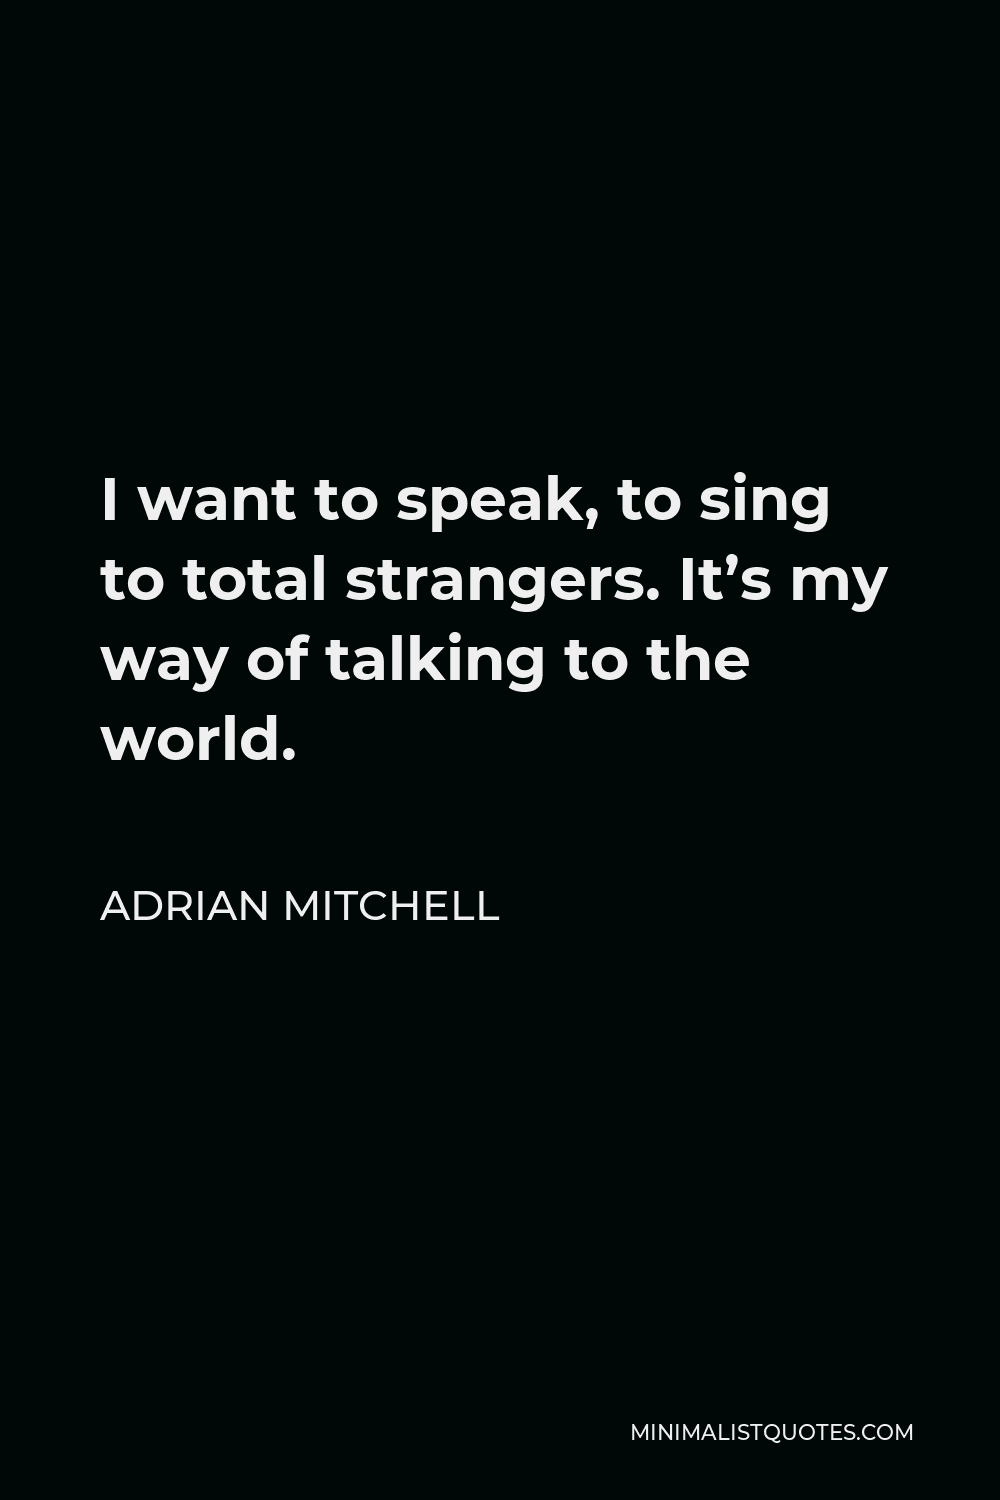 Adrian Mitchell Quote - I want to speak, to sing to total strangers. It’s my way of talking to the world.